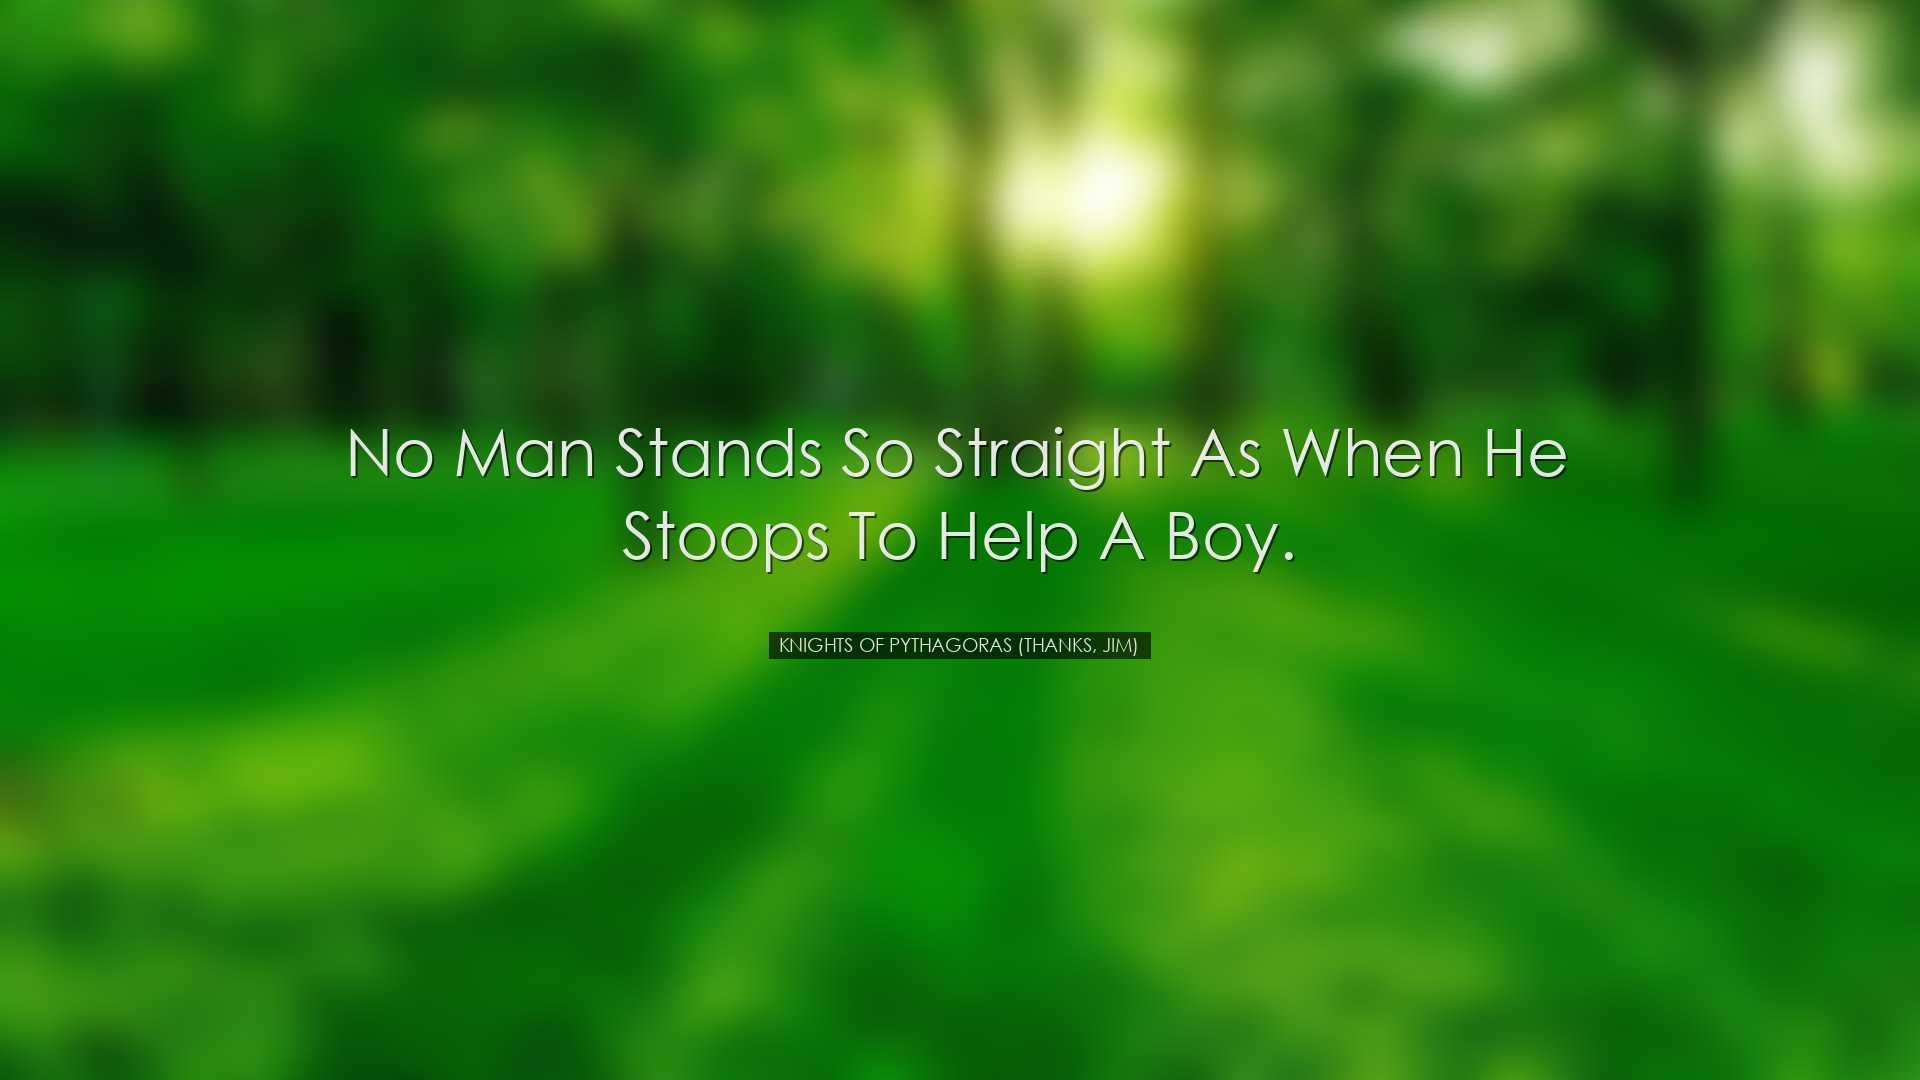 No man stands so straight as when he stoops to help a boy. - Knigh